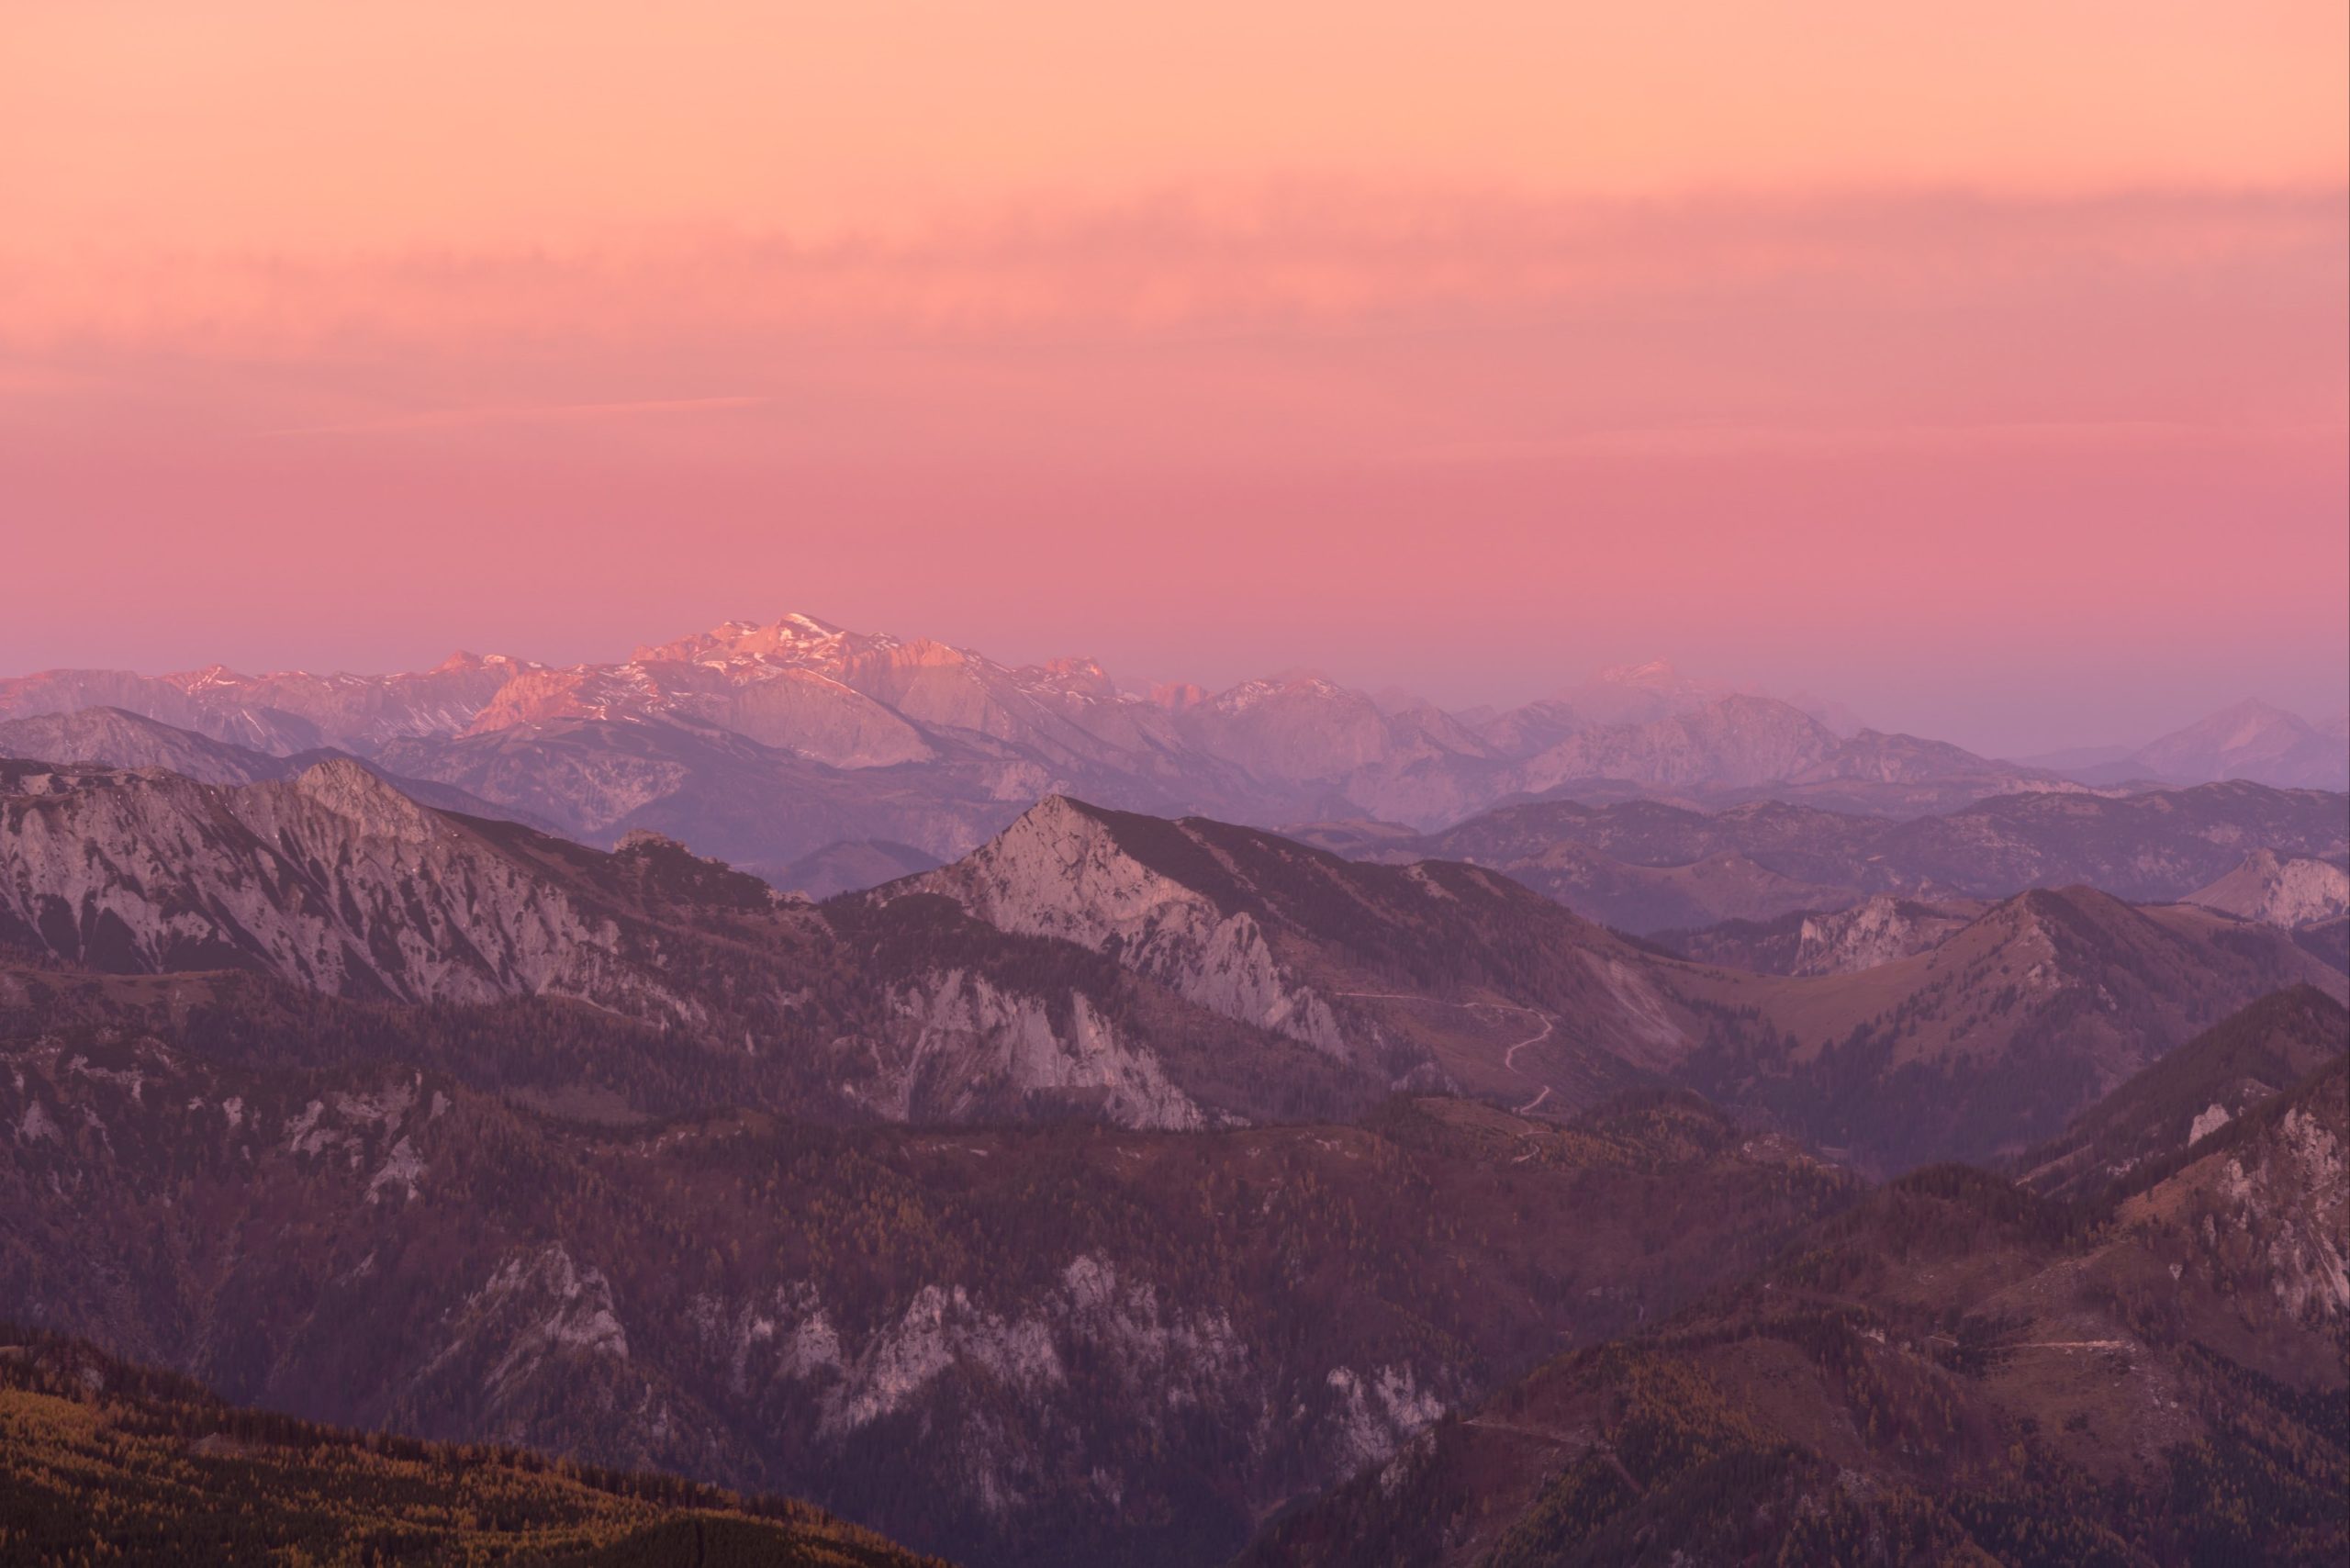 Vibrant pinks and reds over the mountain peaks of Austria including the Rax plateau from Schneeberg